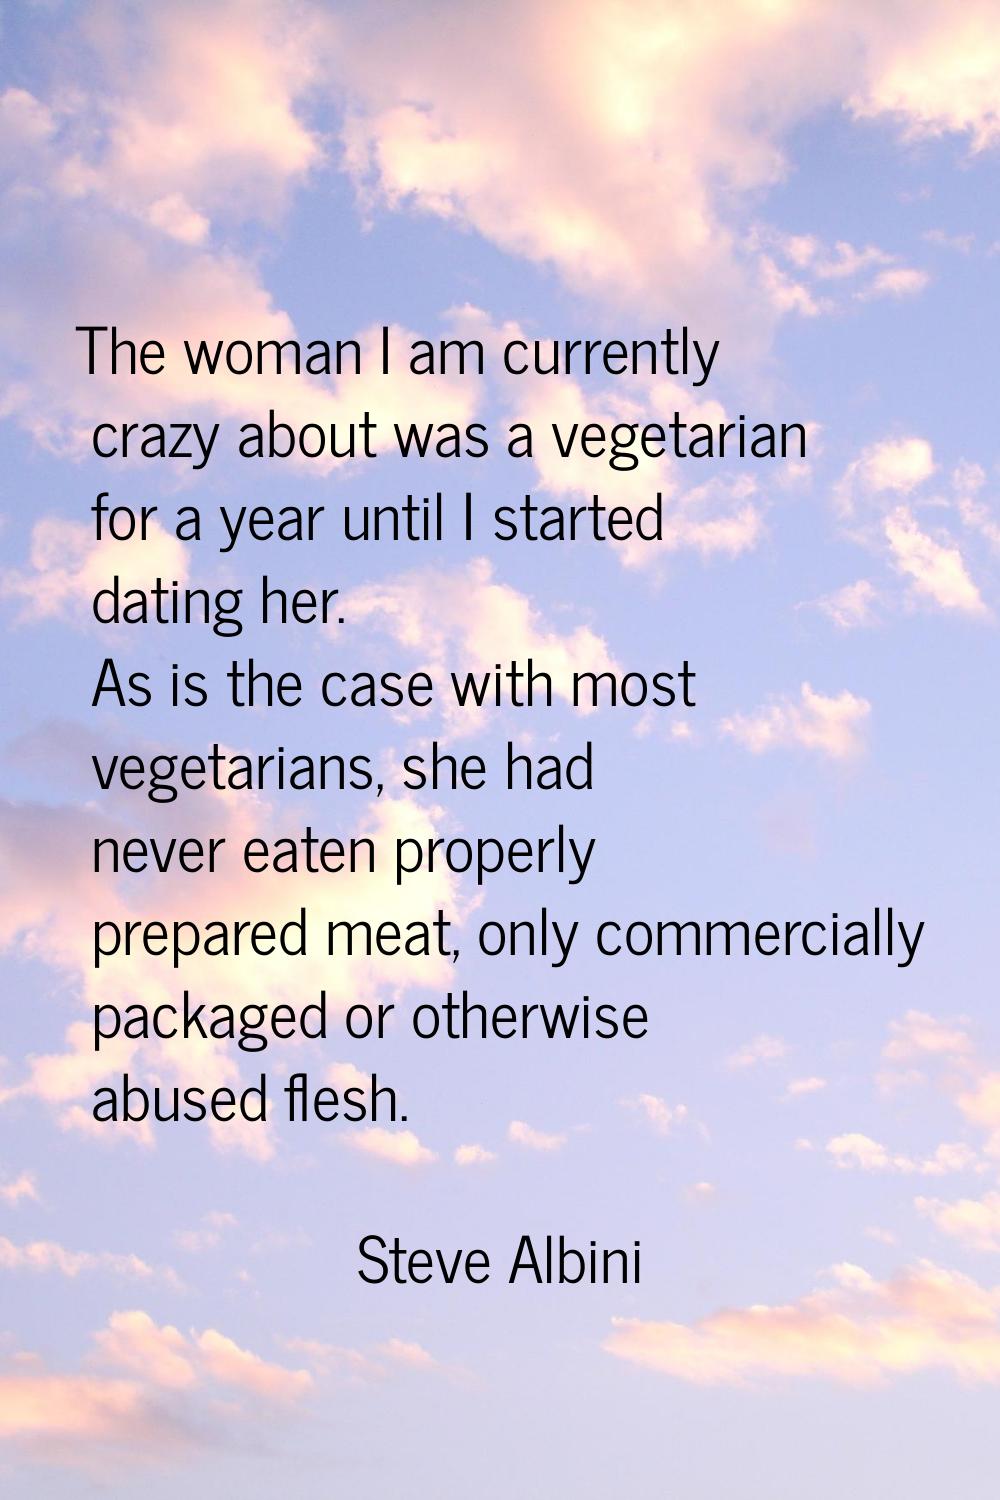 The woman I am currently crazy about was a vegetarian for a year until I started dating her. As is 